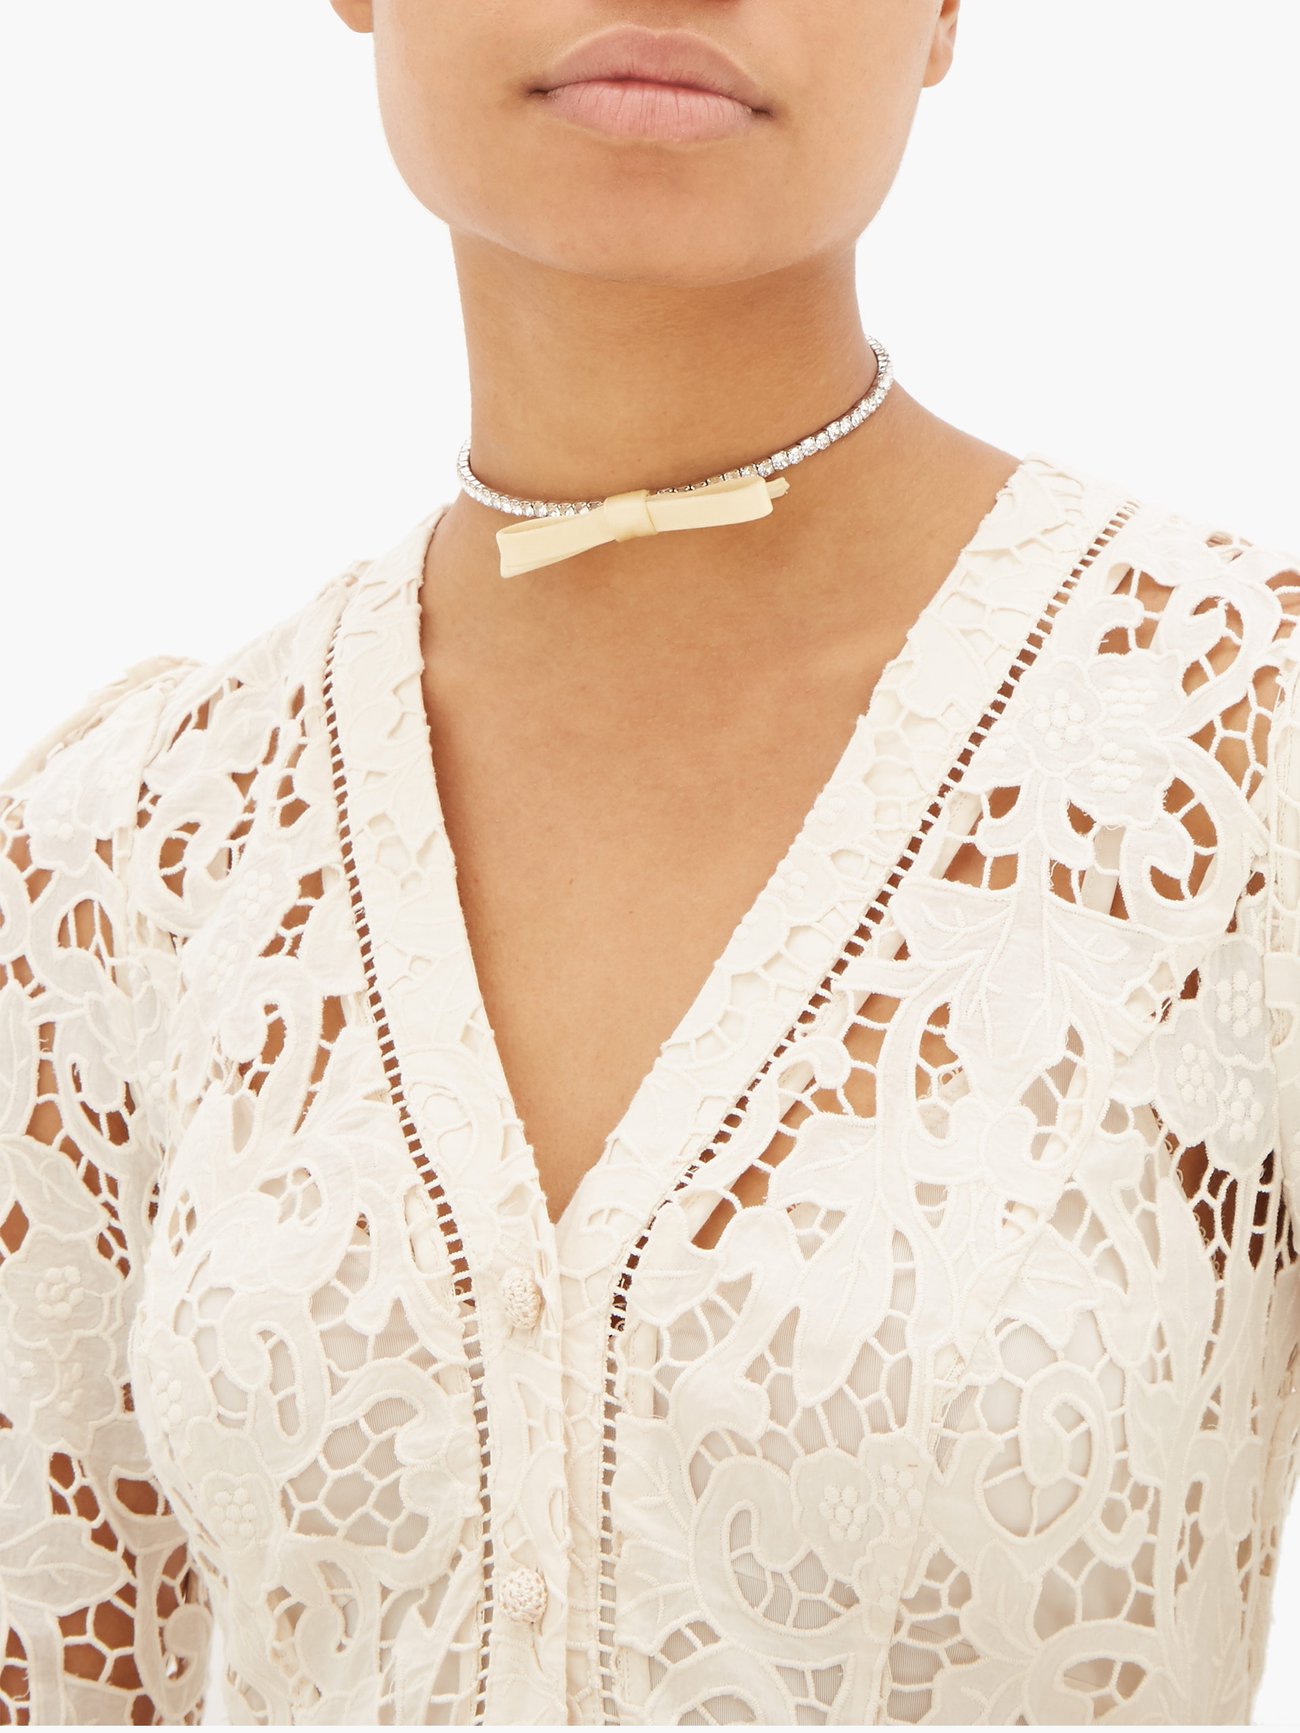 Miu Miu’s white choker necklace is adorned with a beige satin bow which echoes Miuccia Prada’s feminine sensibility. It’s crafted in Italy from silver-tone metal encrusted with sparkling pavé-set crystals around the coiling band. Frame it with the neckline of a lace dress for an elegant occasion look.